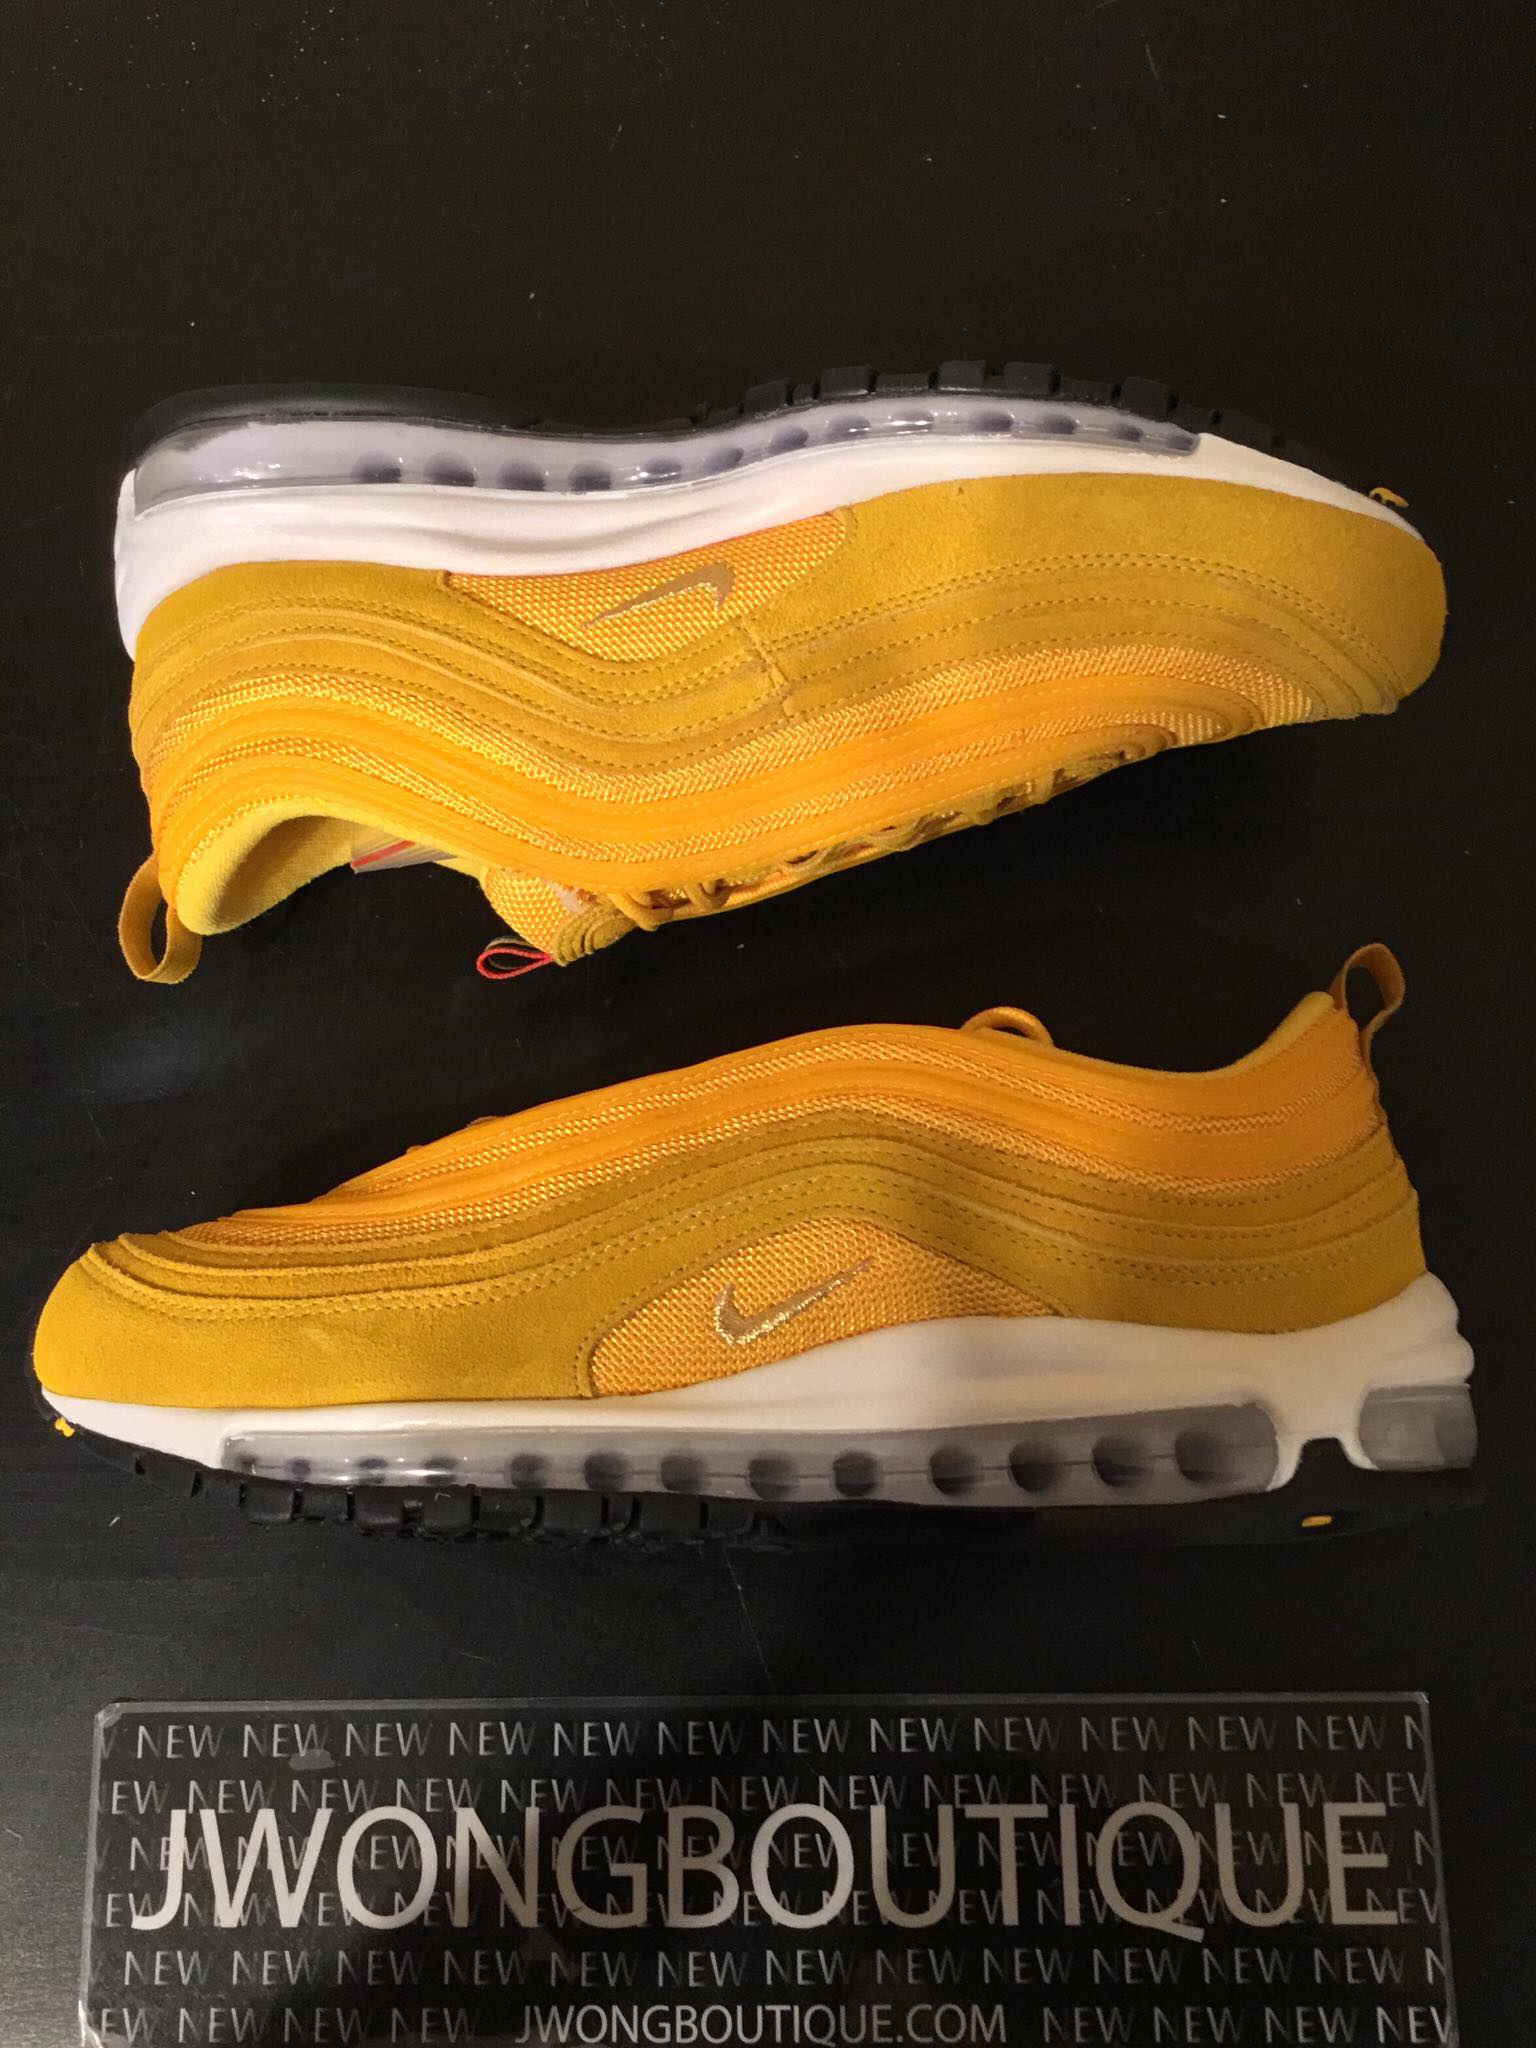 2020 Nike Air Max 97 Olympic Rings Pack Yellow Men Jwong Boutique